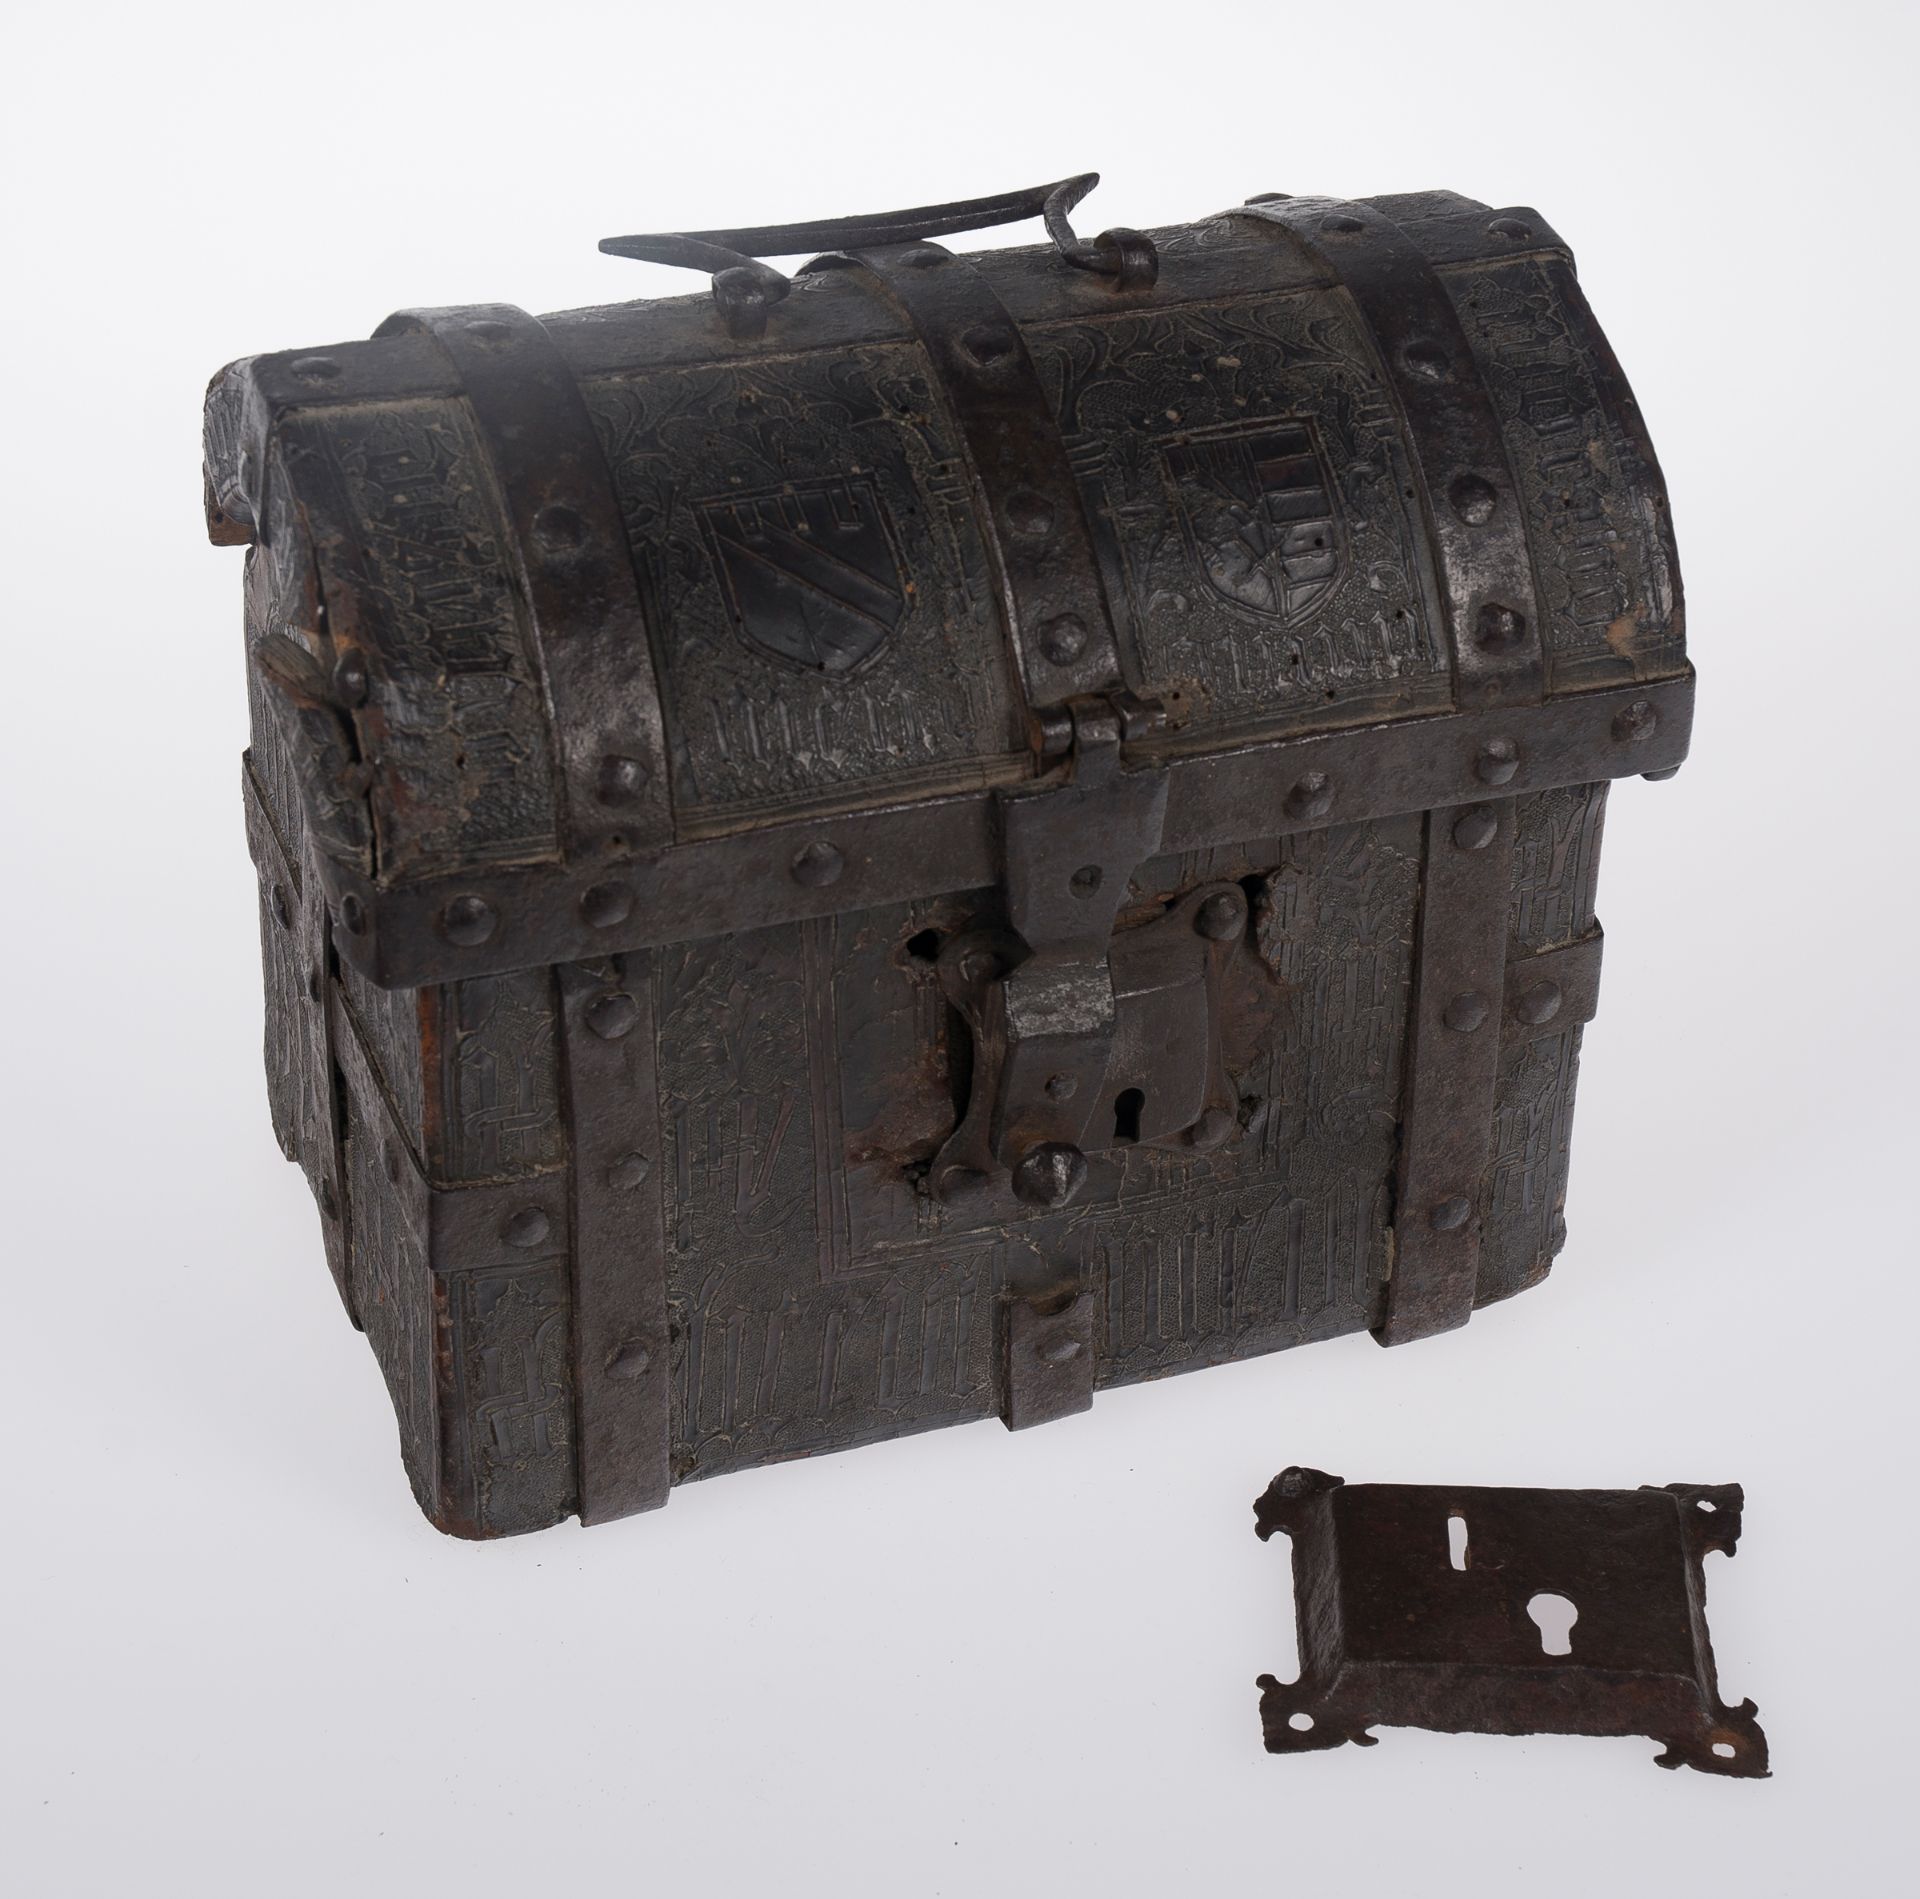 Wooden chest covered in embossed and engraved leather, with iron fittings. Gothic. 15th century. - Bild 7 aus 8